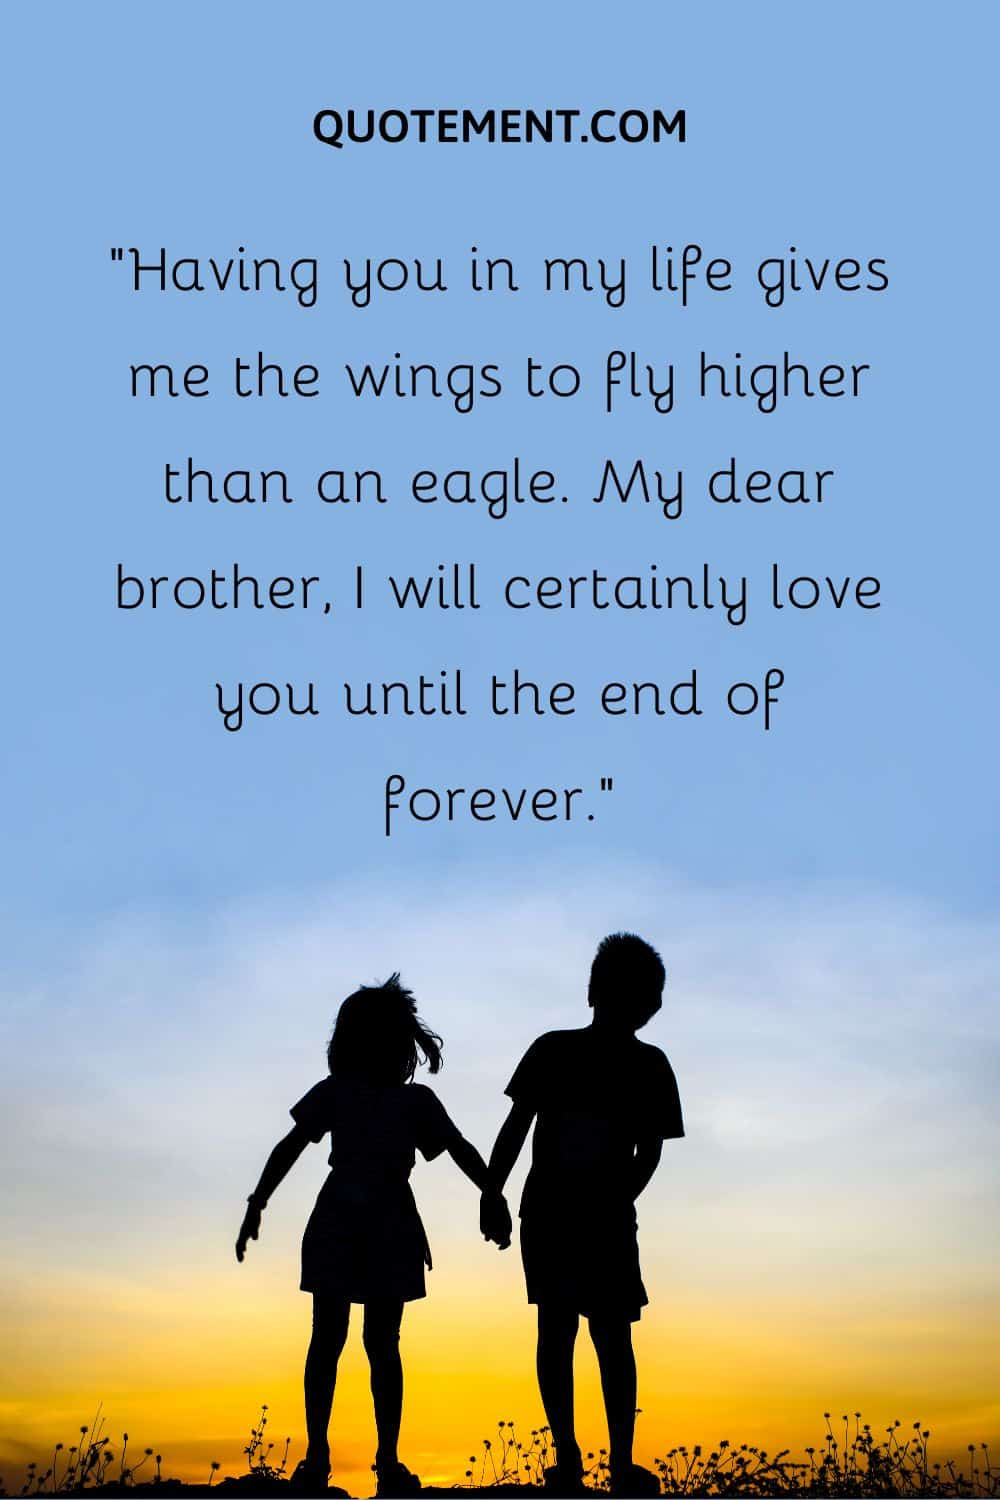 “Having you in my life gives me the wings to fly higher than an eagle. My dear brother, I will certainly love you until the end of forever.”